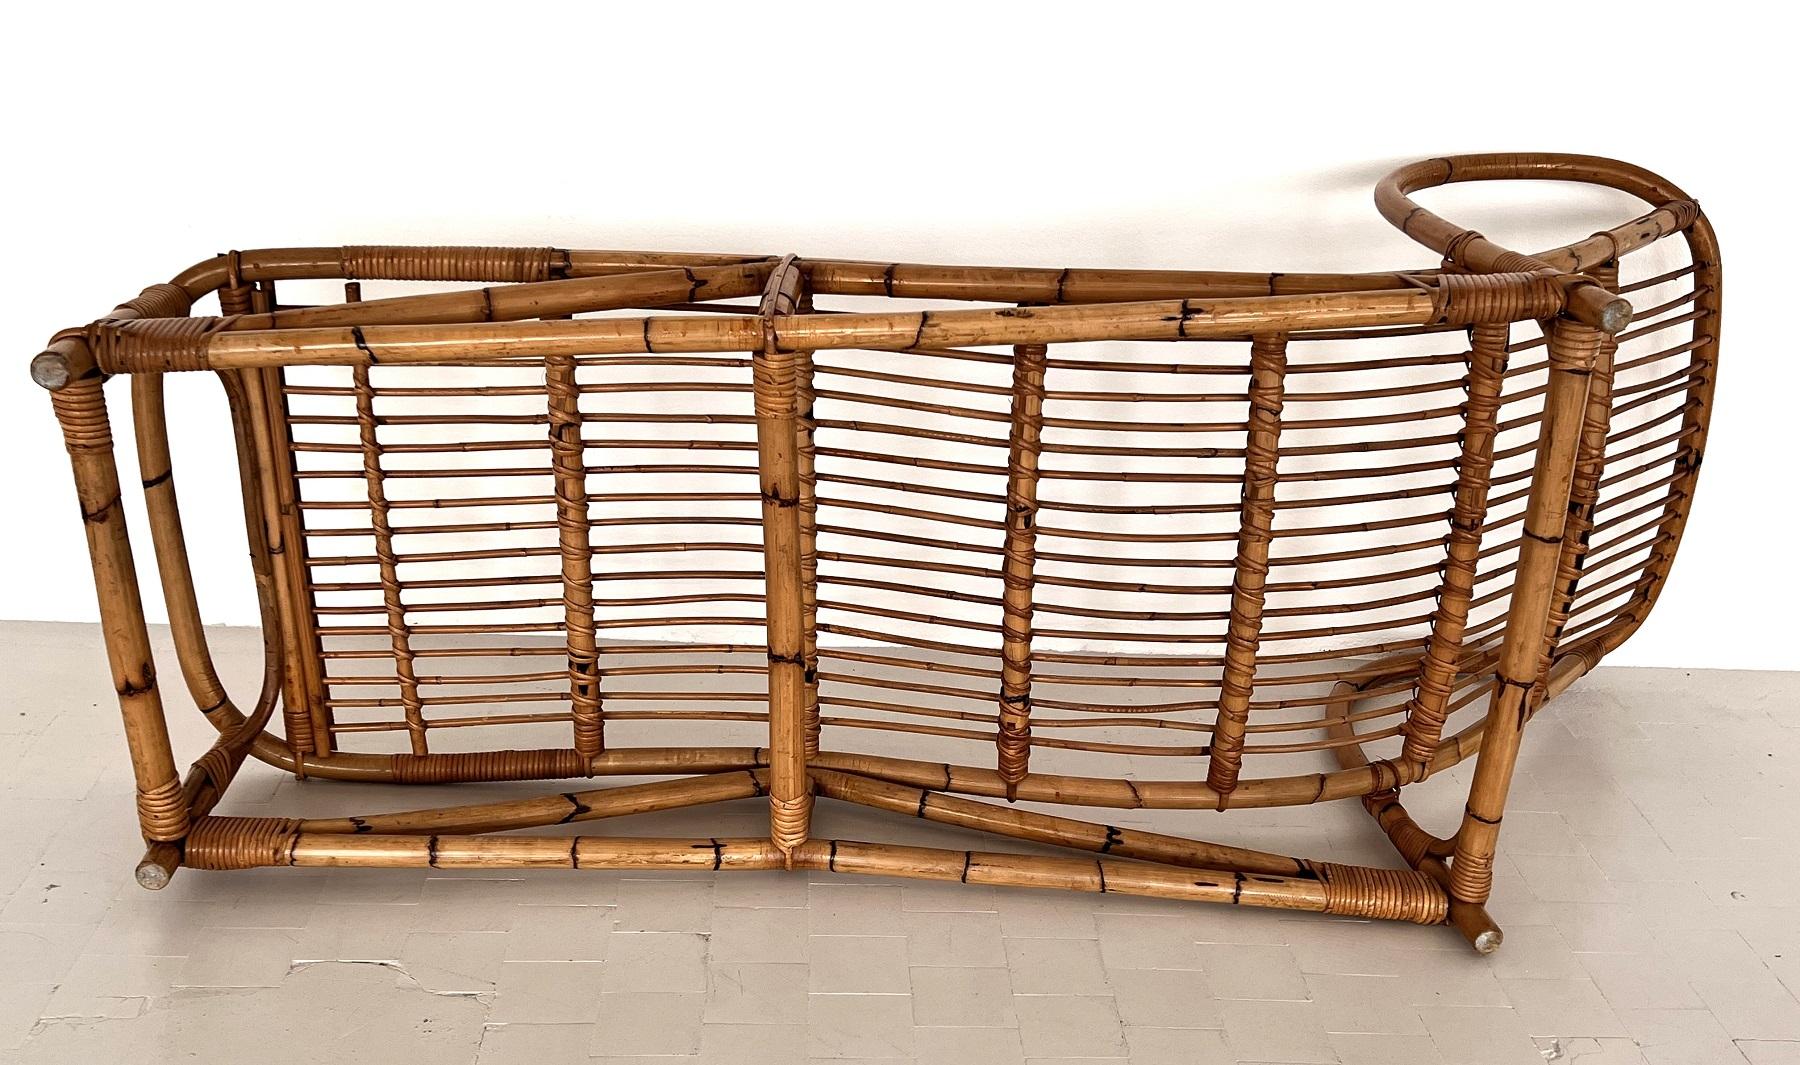 Italian Midcentury Organic Bamboo Daybed or Sunbed For Sale 1